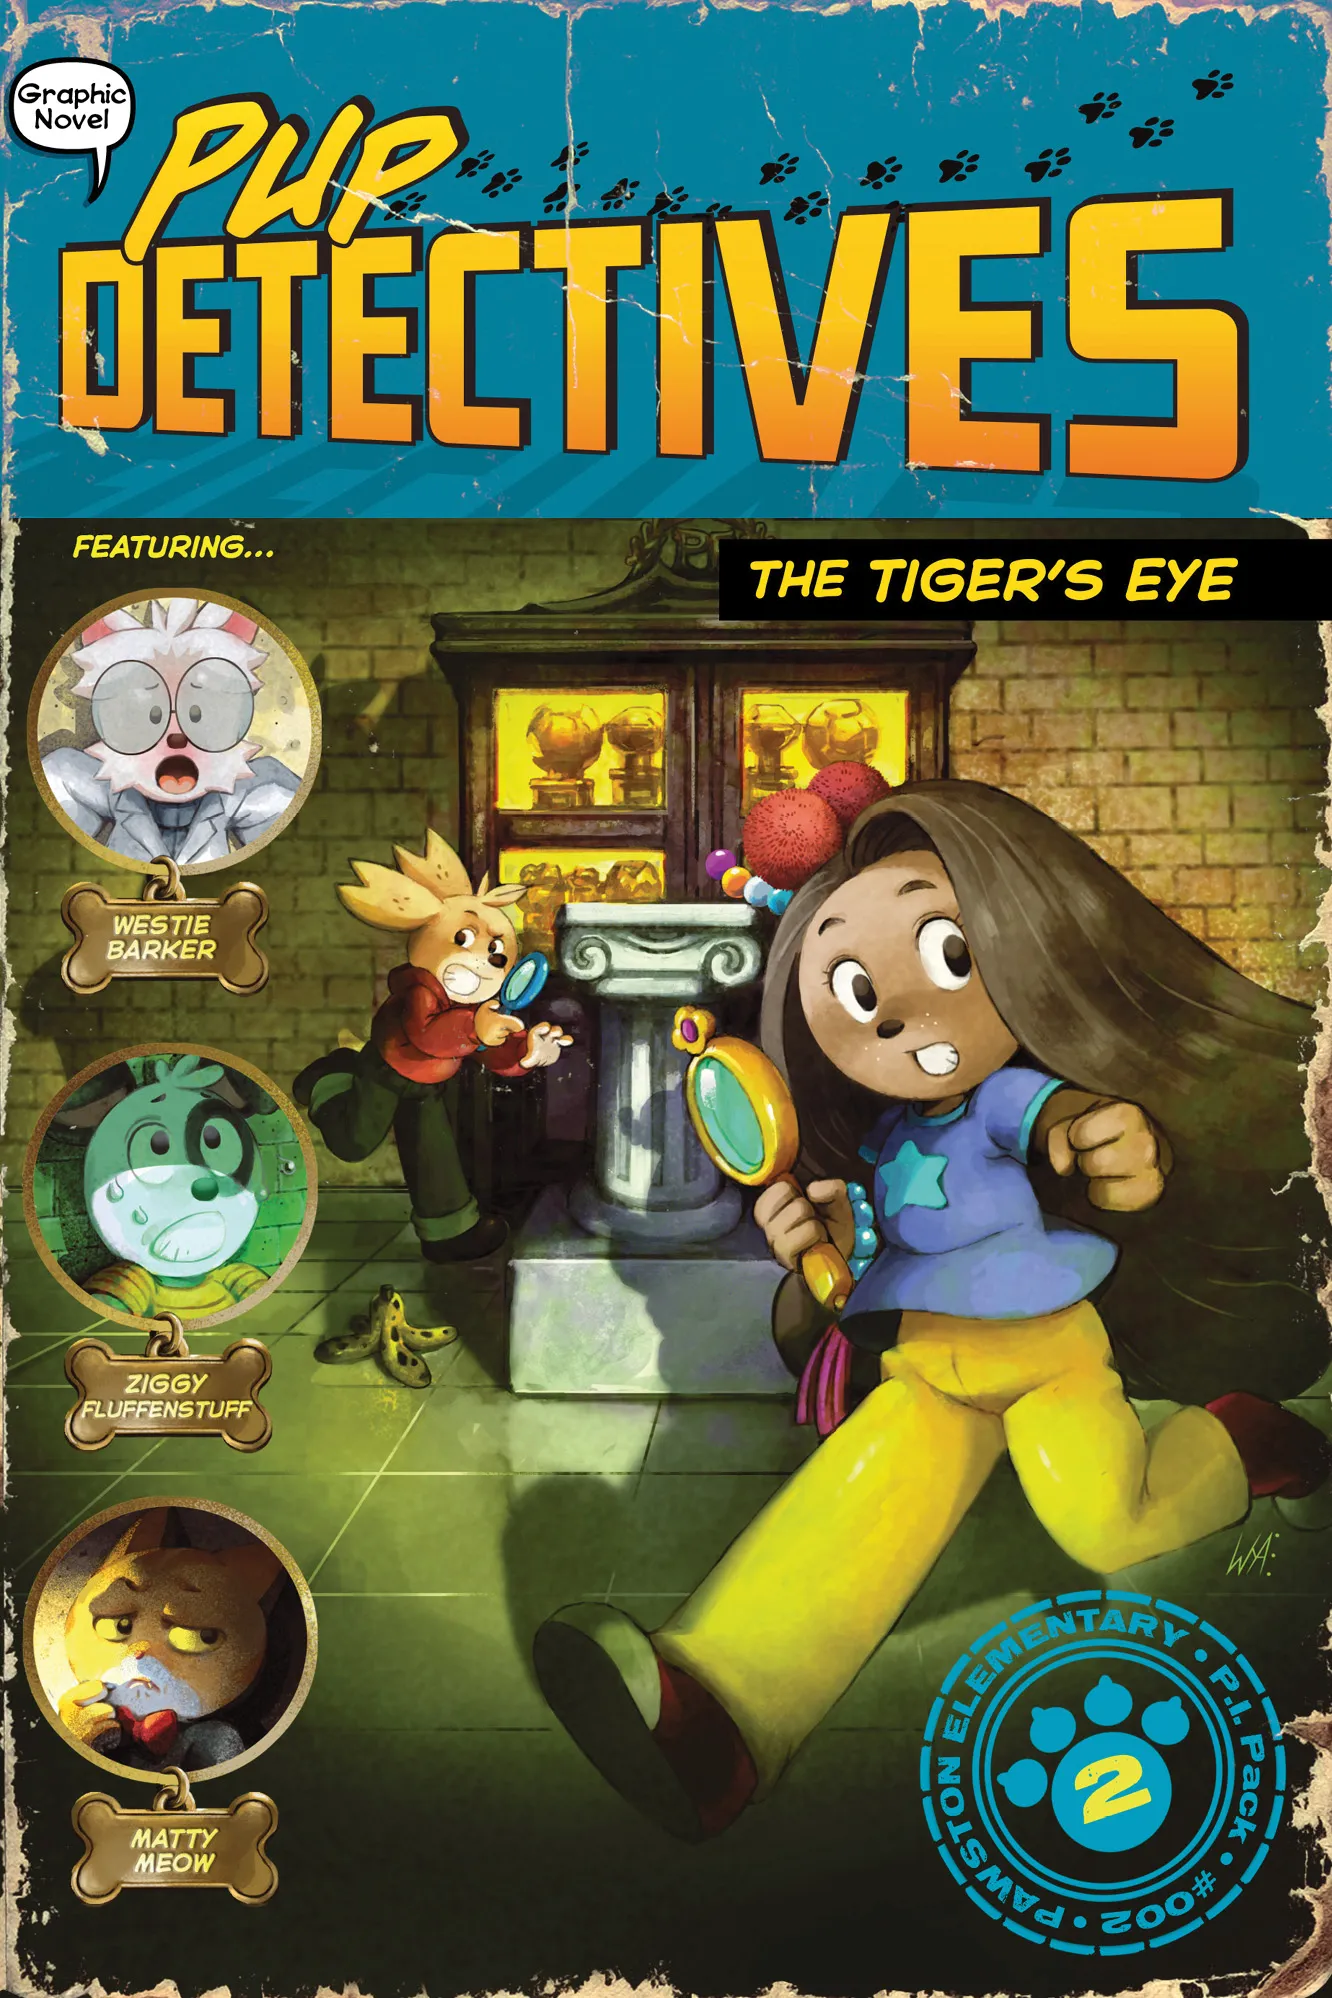 The Tiger's Eye (Pup Detectives #2)